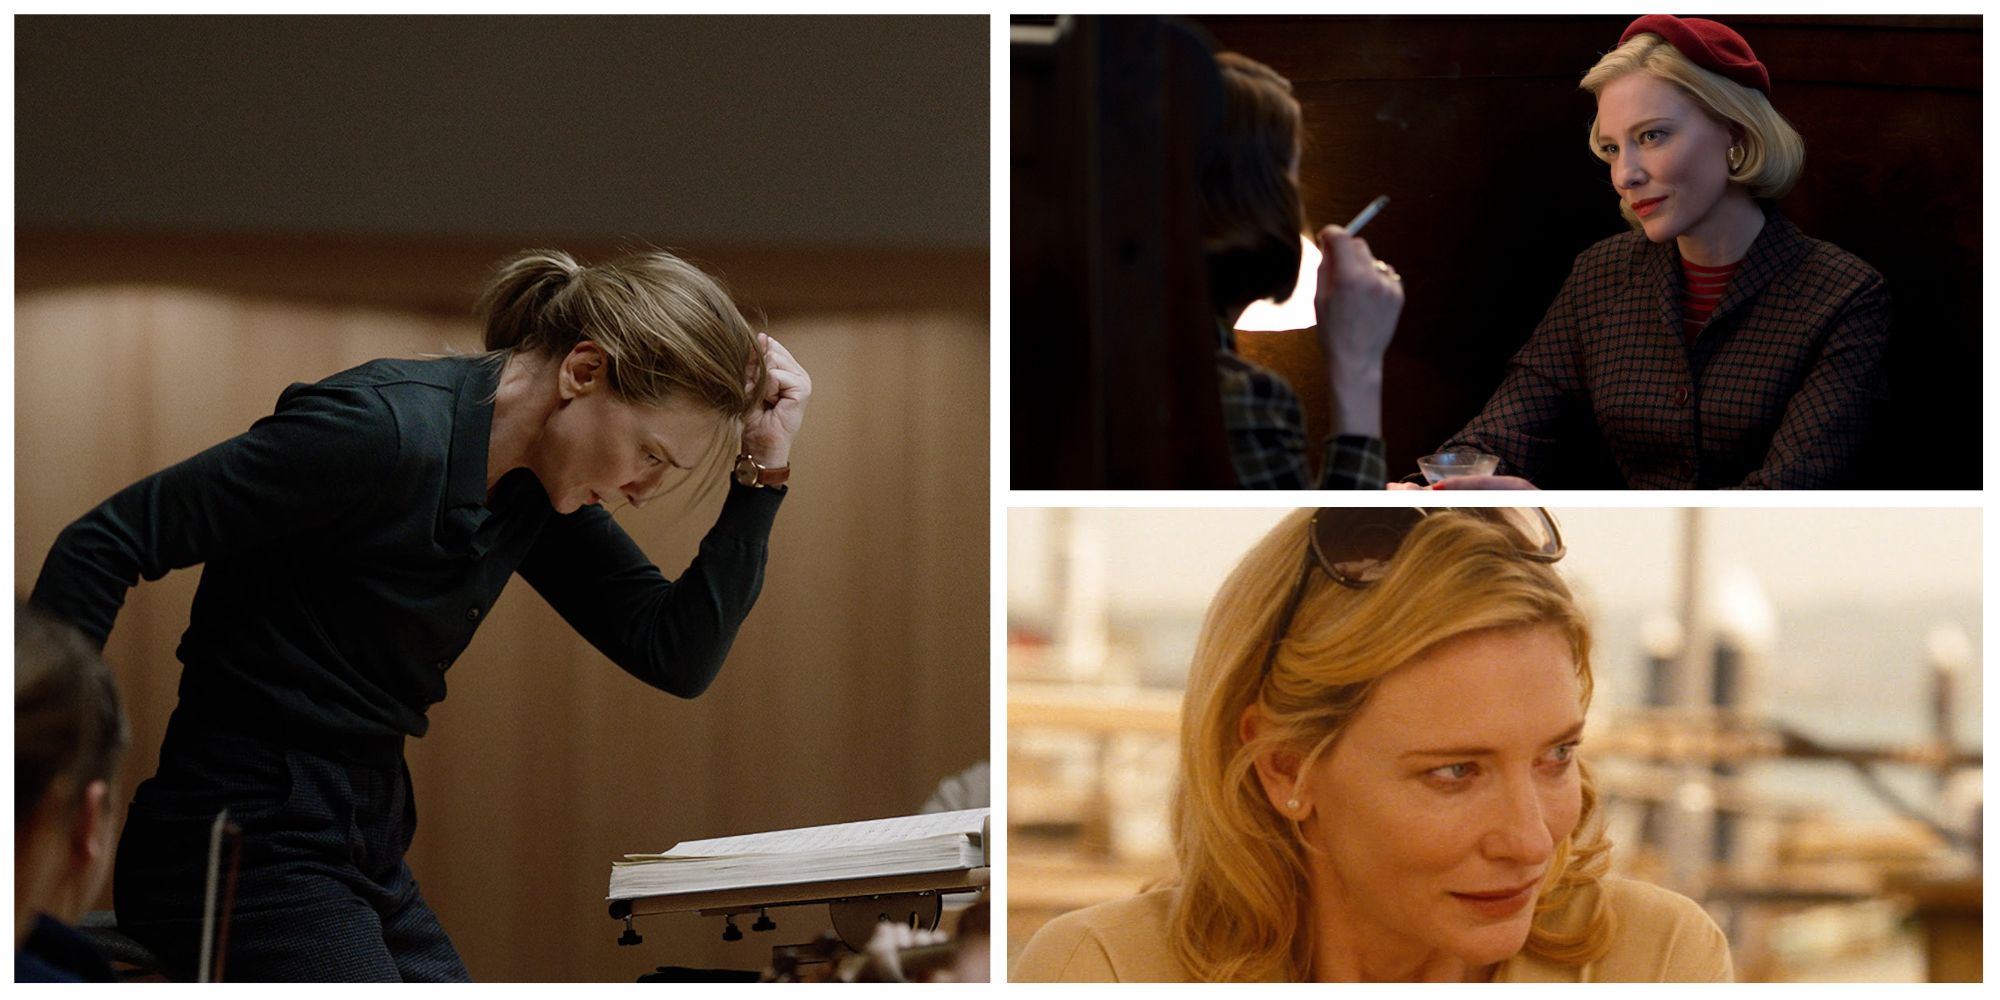 Left image: Lydia Tar conducting her orchestra. Top right: Blanchett as Carol looking and smiling at her friend in Carol. Bottom right: Jasmine in Blue Jasmine looking upset with someone off screen.